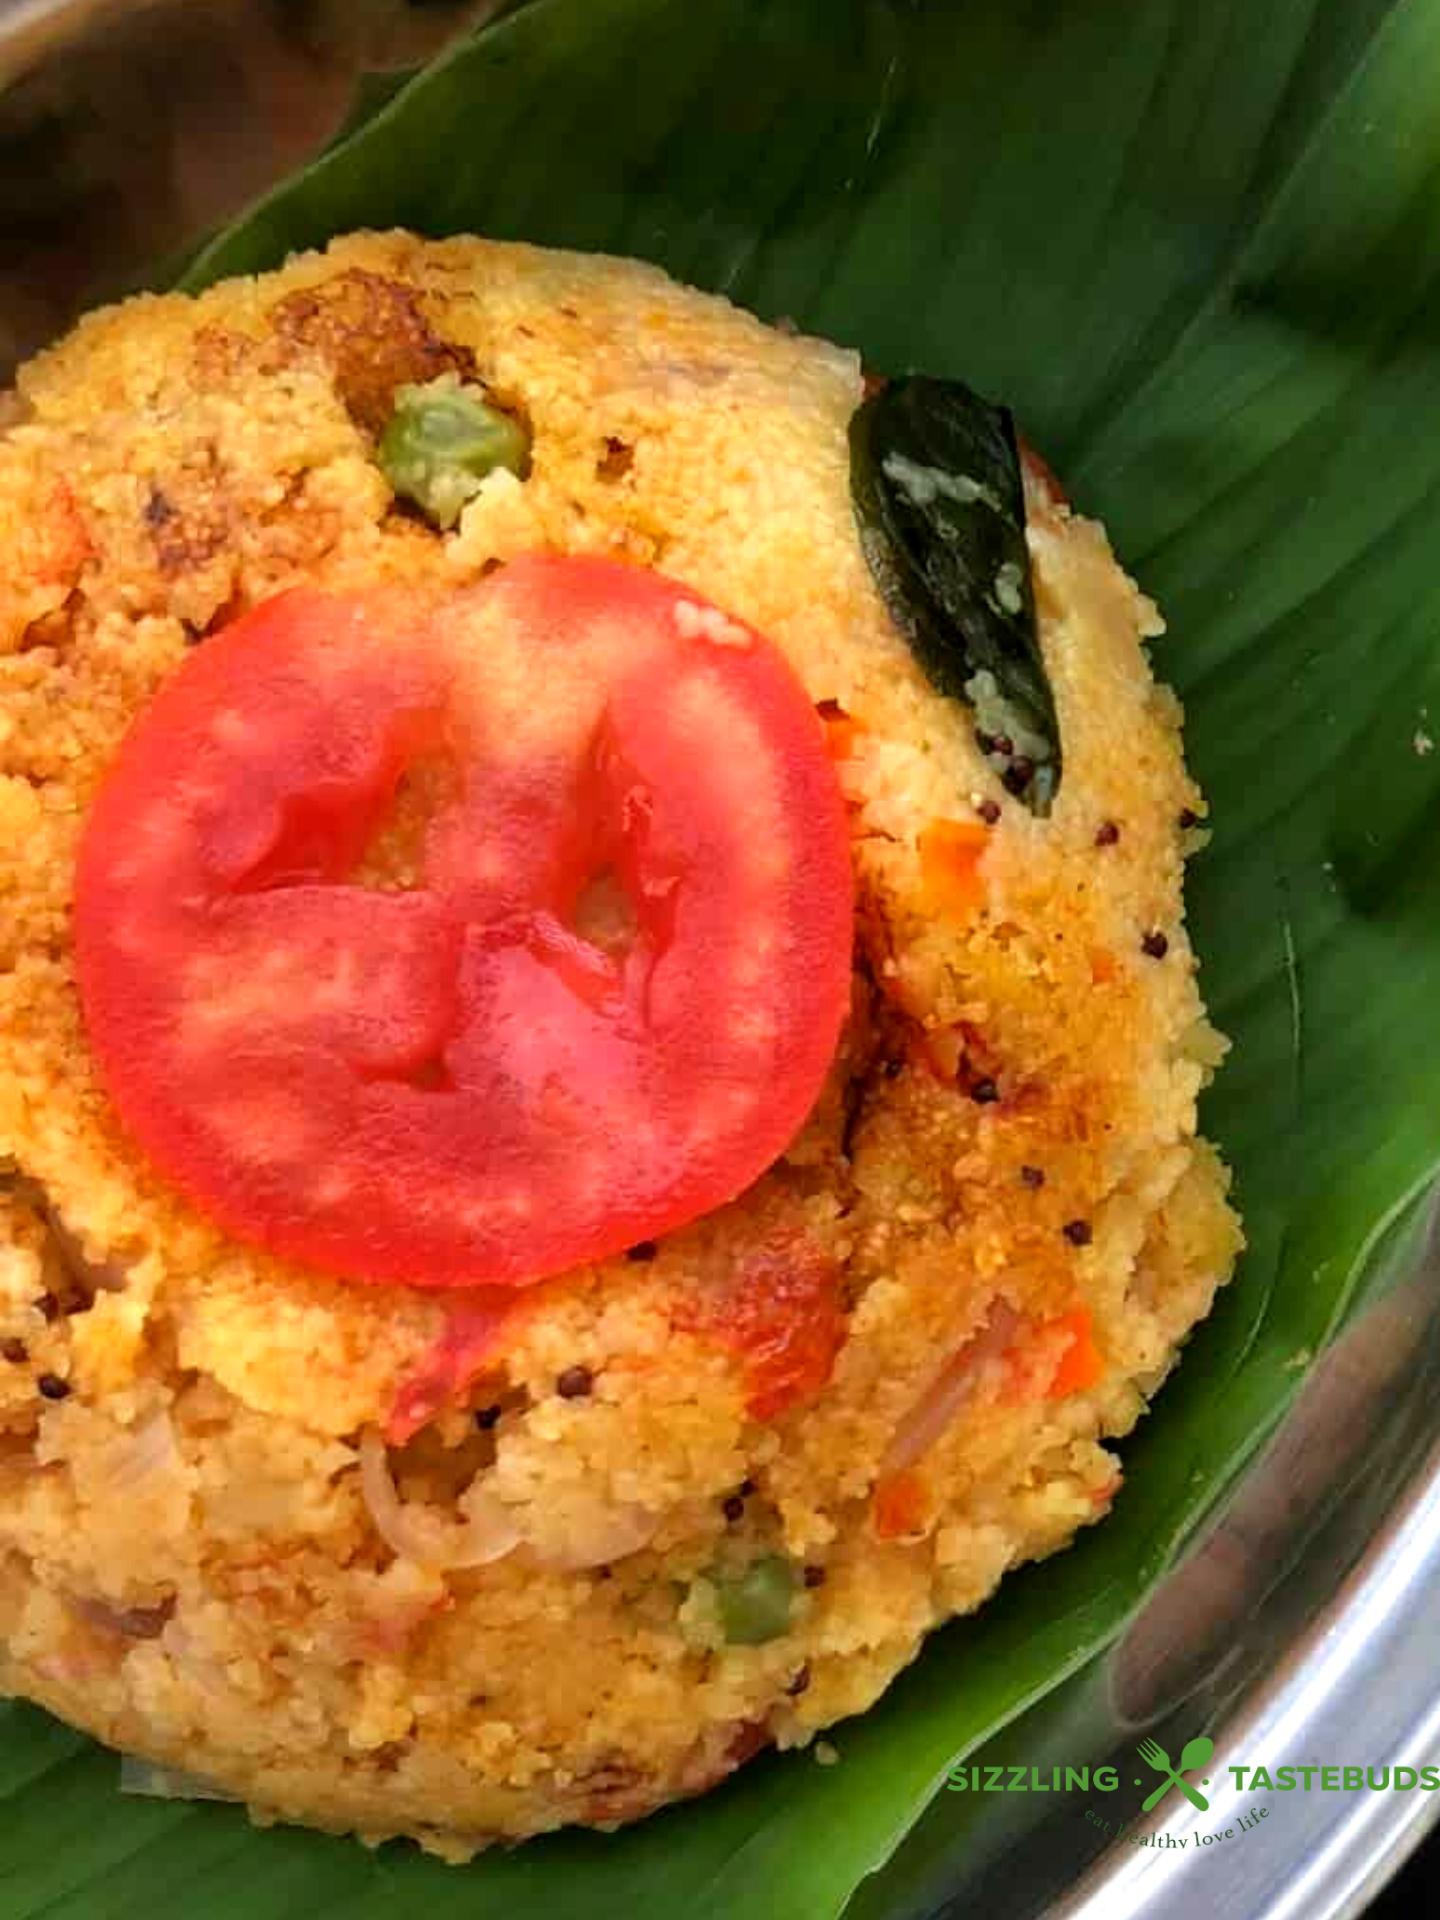 Kharabhath is a semolina based savory pudding made in Karnataka. It has vegetables added with a special spice mix. Eaten as breakfast or snack